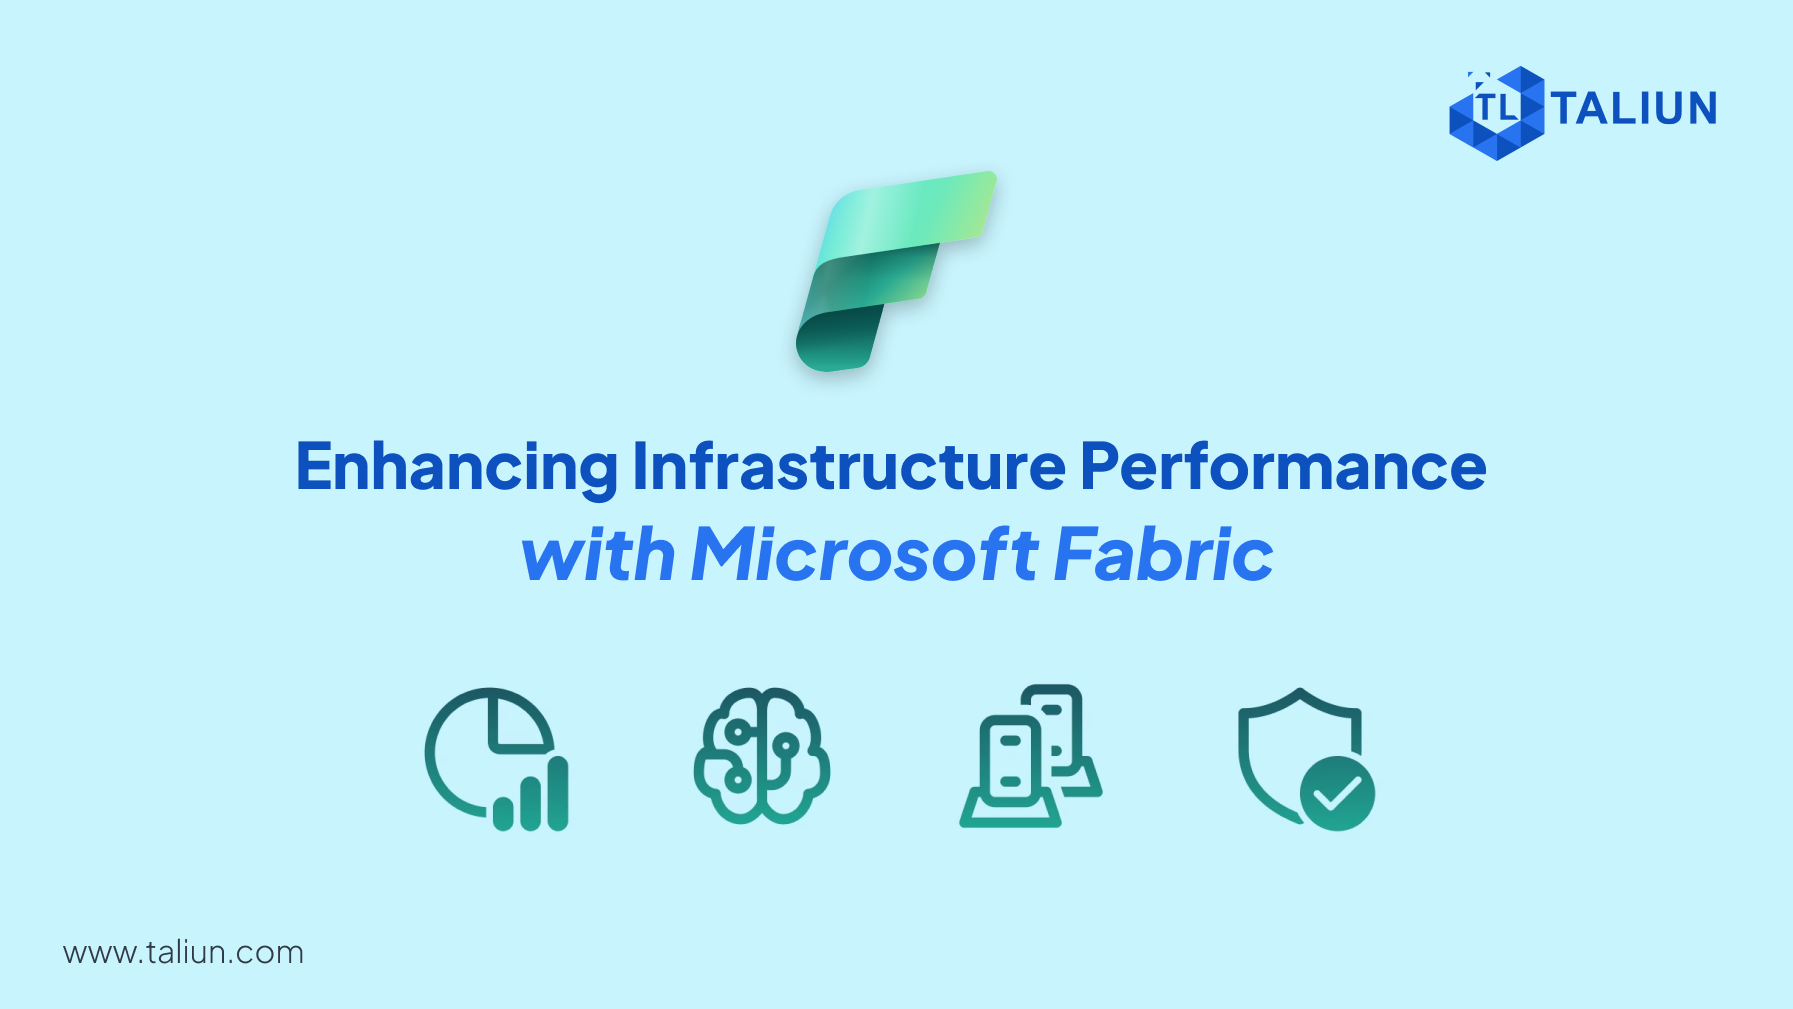 Enhancing Infrastructure Performance with Microsoft Fabric